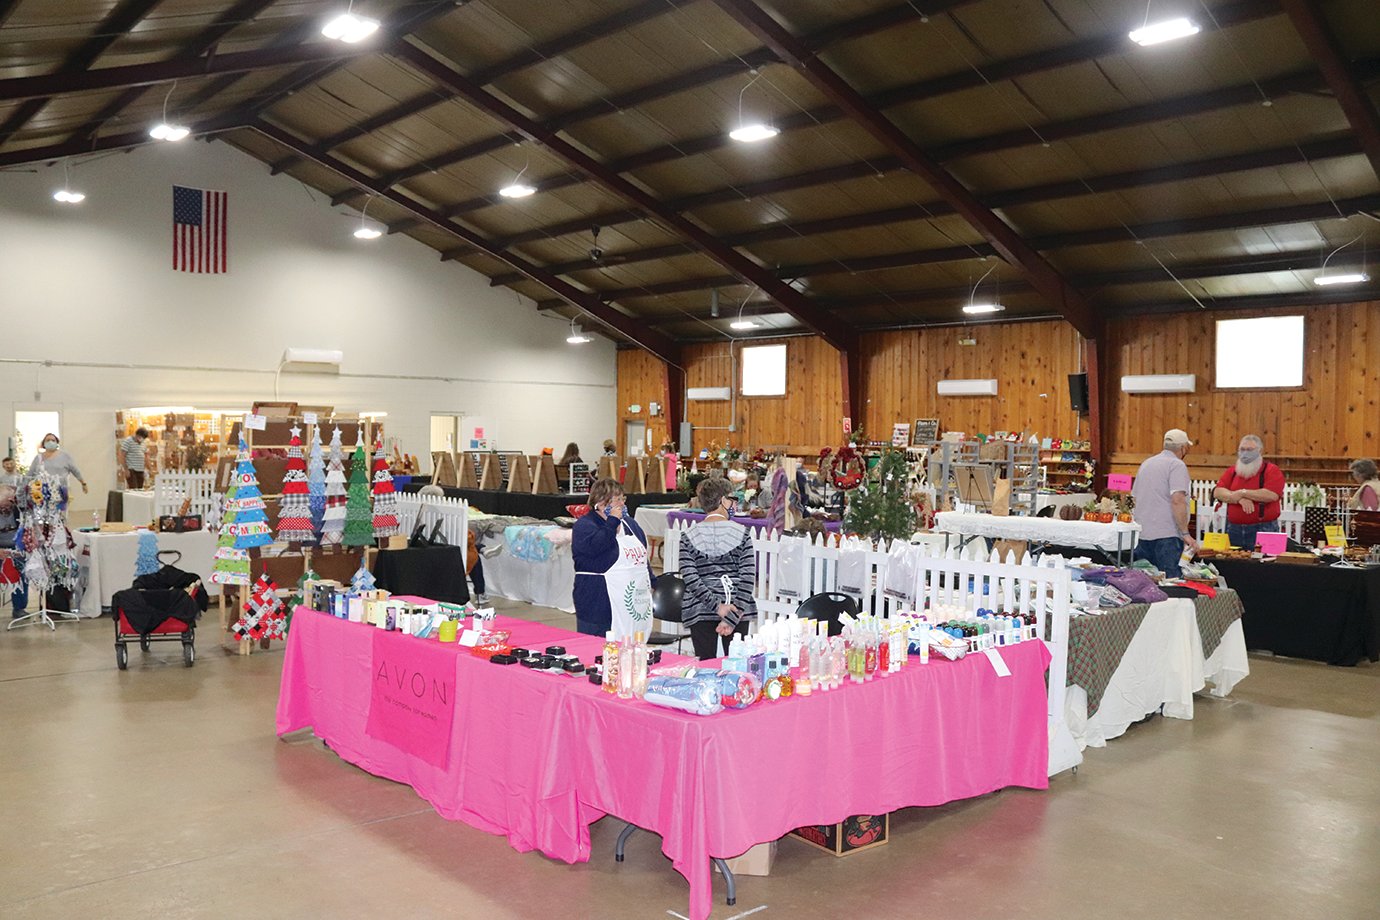 The 4-H Fairgrounds saw hundreds of visitors and nearly two dozen vendors Saturday for an annual Holiday Expo, sponsored by the 4-H Extension Homemakers Club.